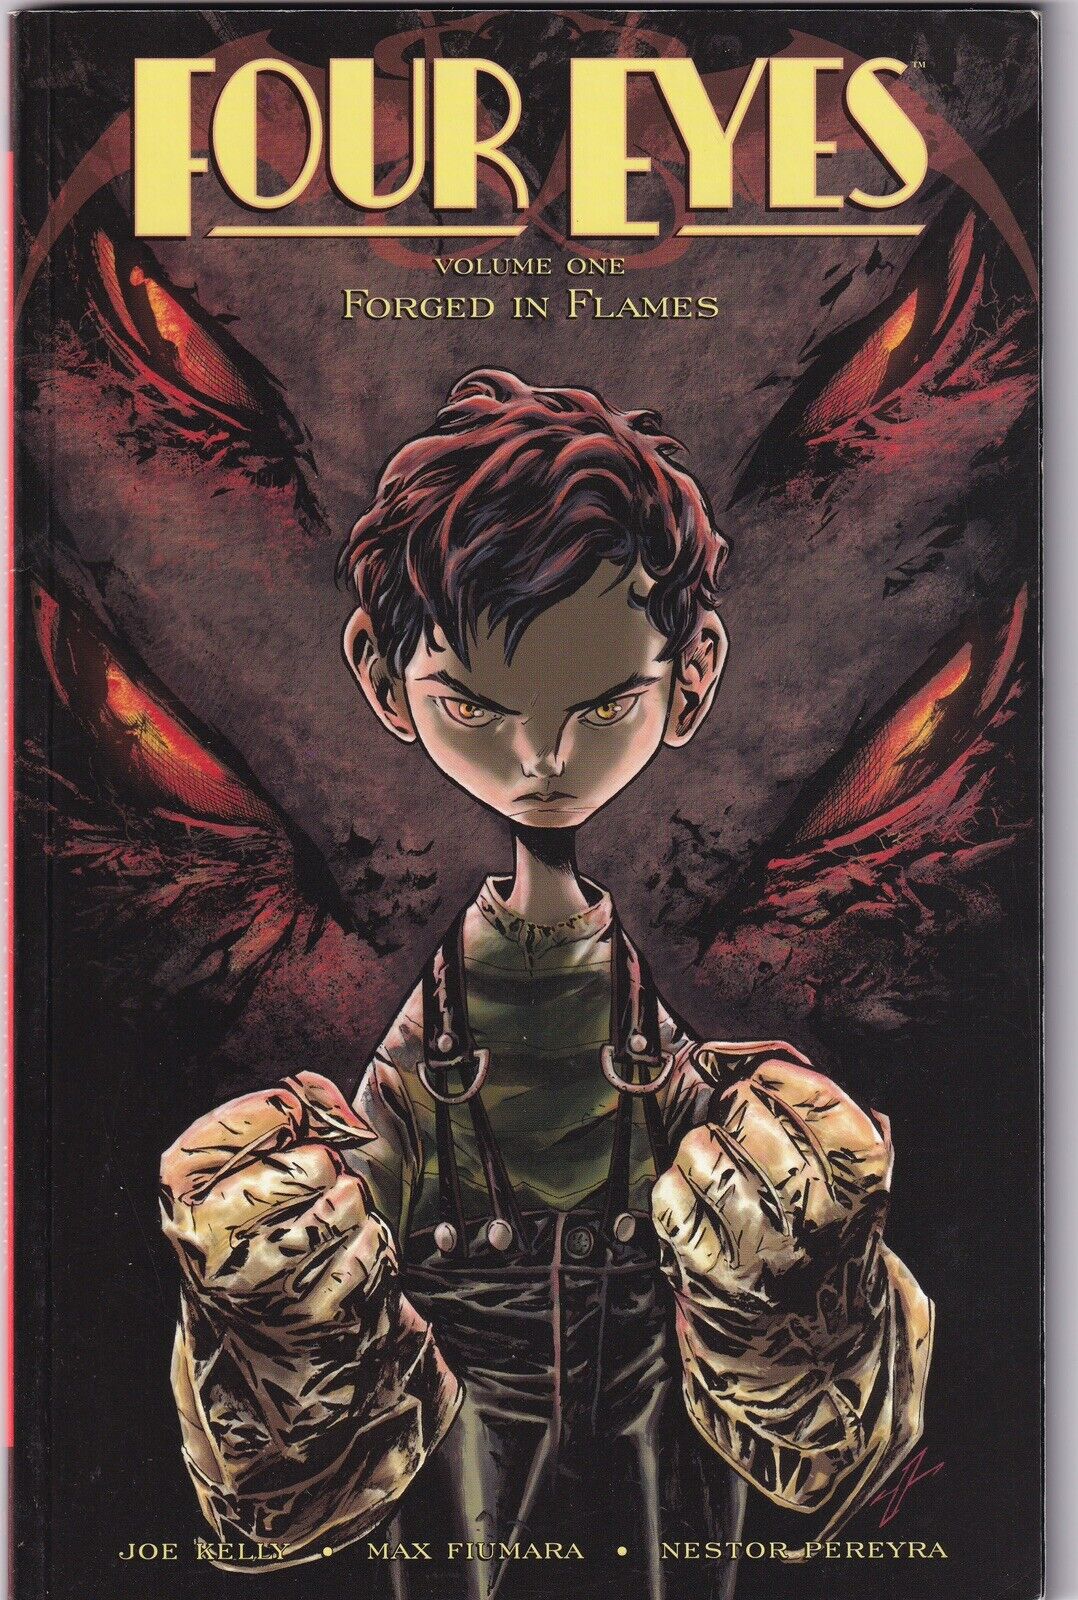 Four Eyes Volume One: Forged in Flames (Image Comics, 2010) TPB